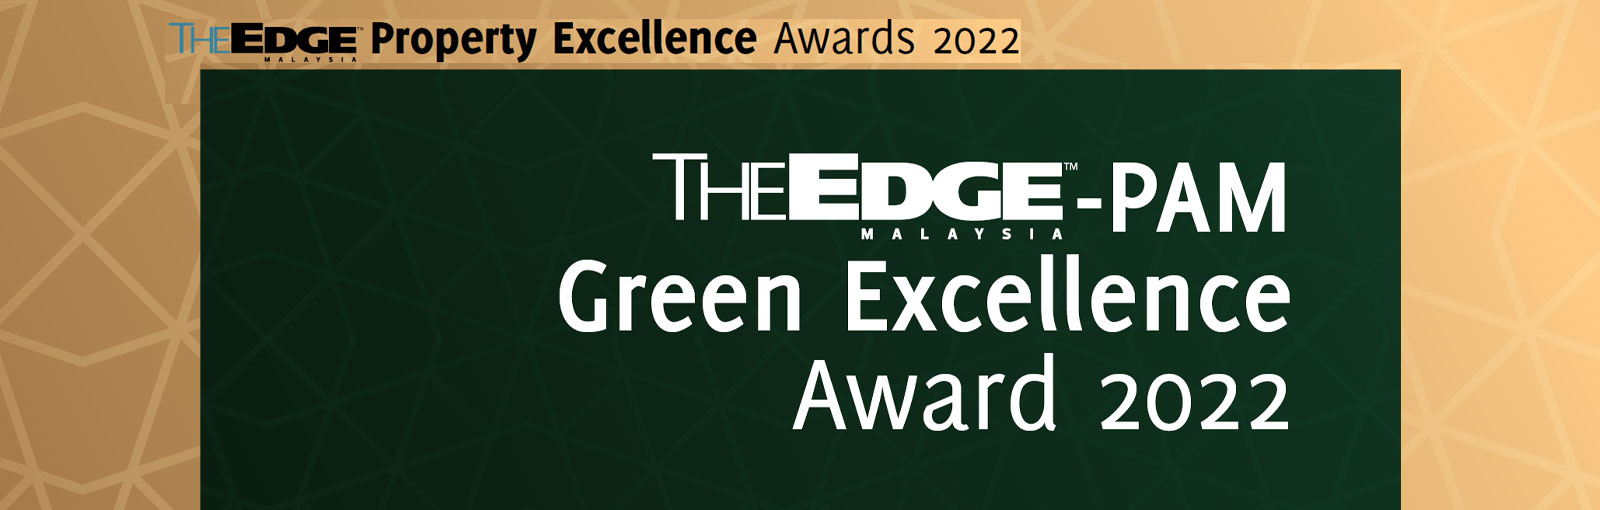 TheEdge-PAM Excellence Awards 2022